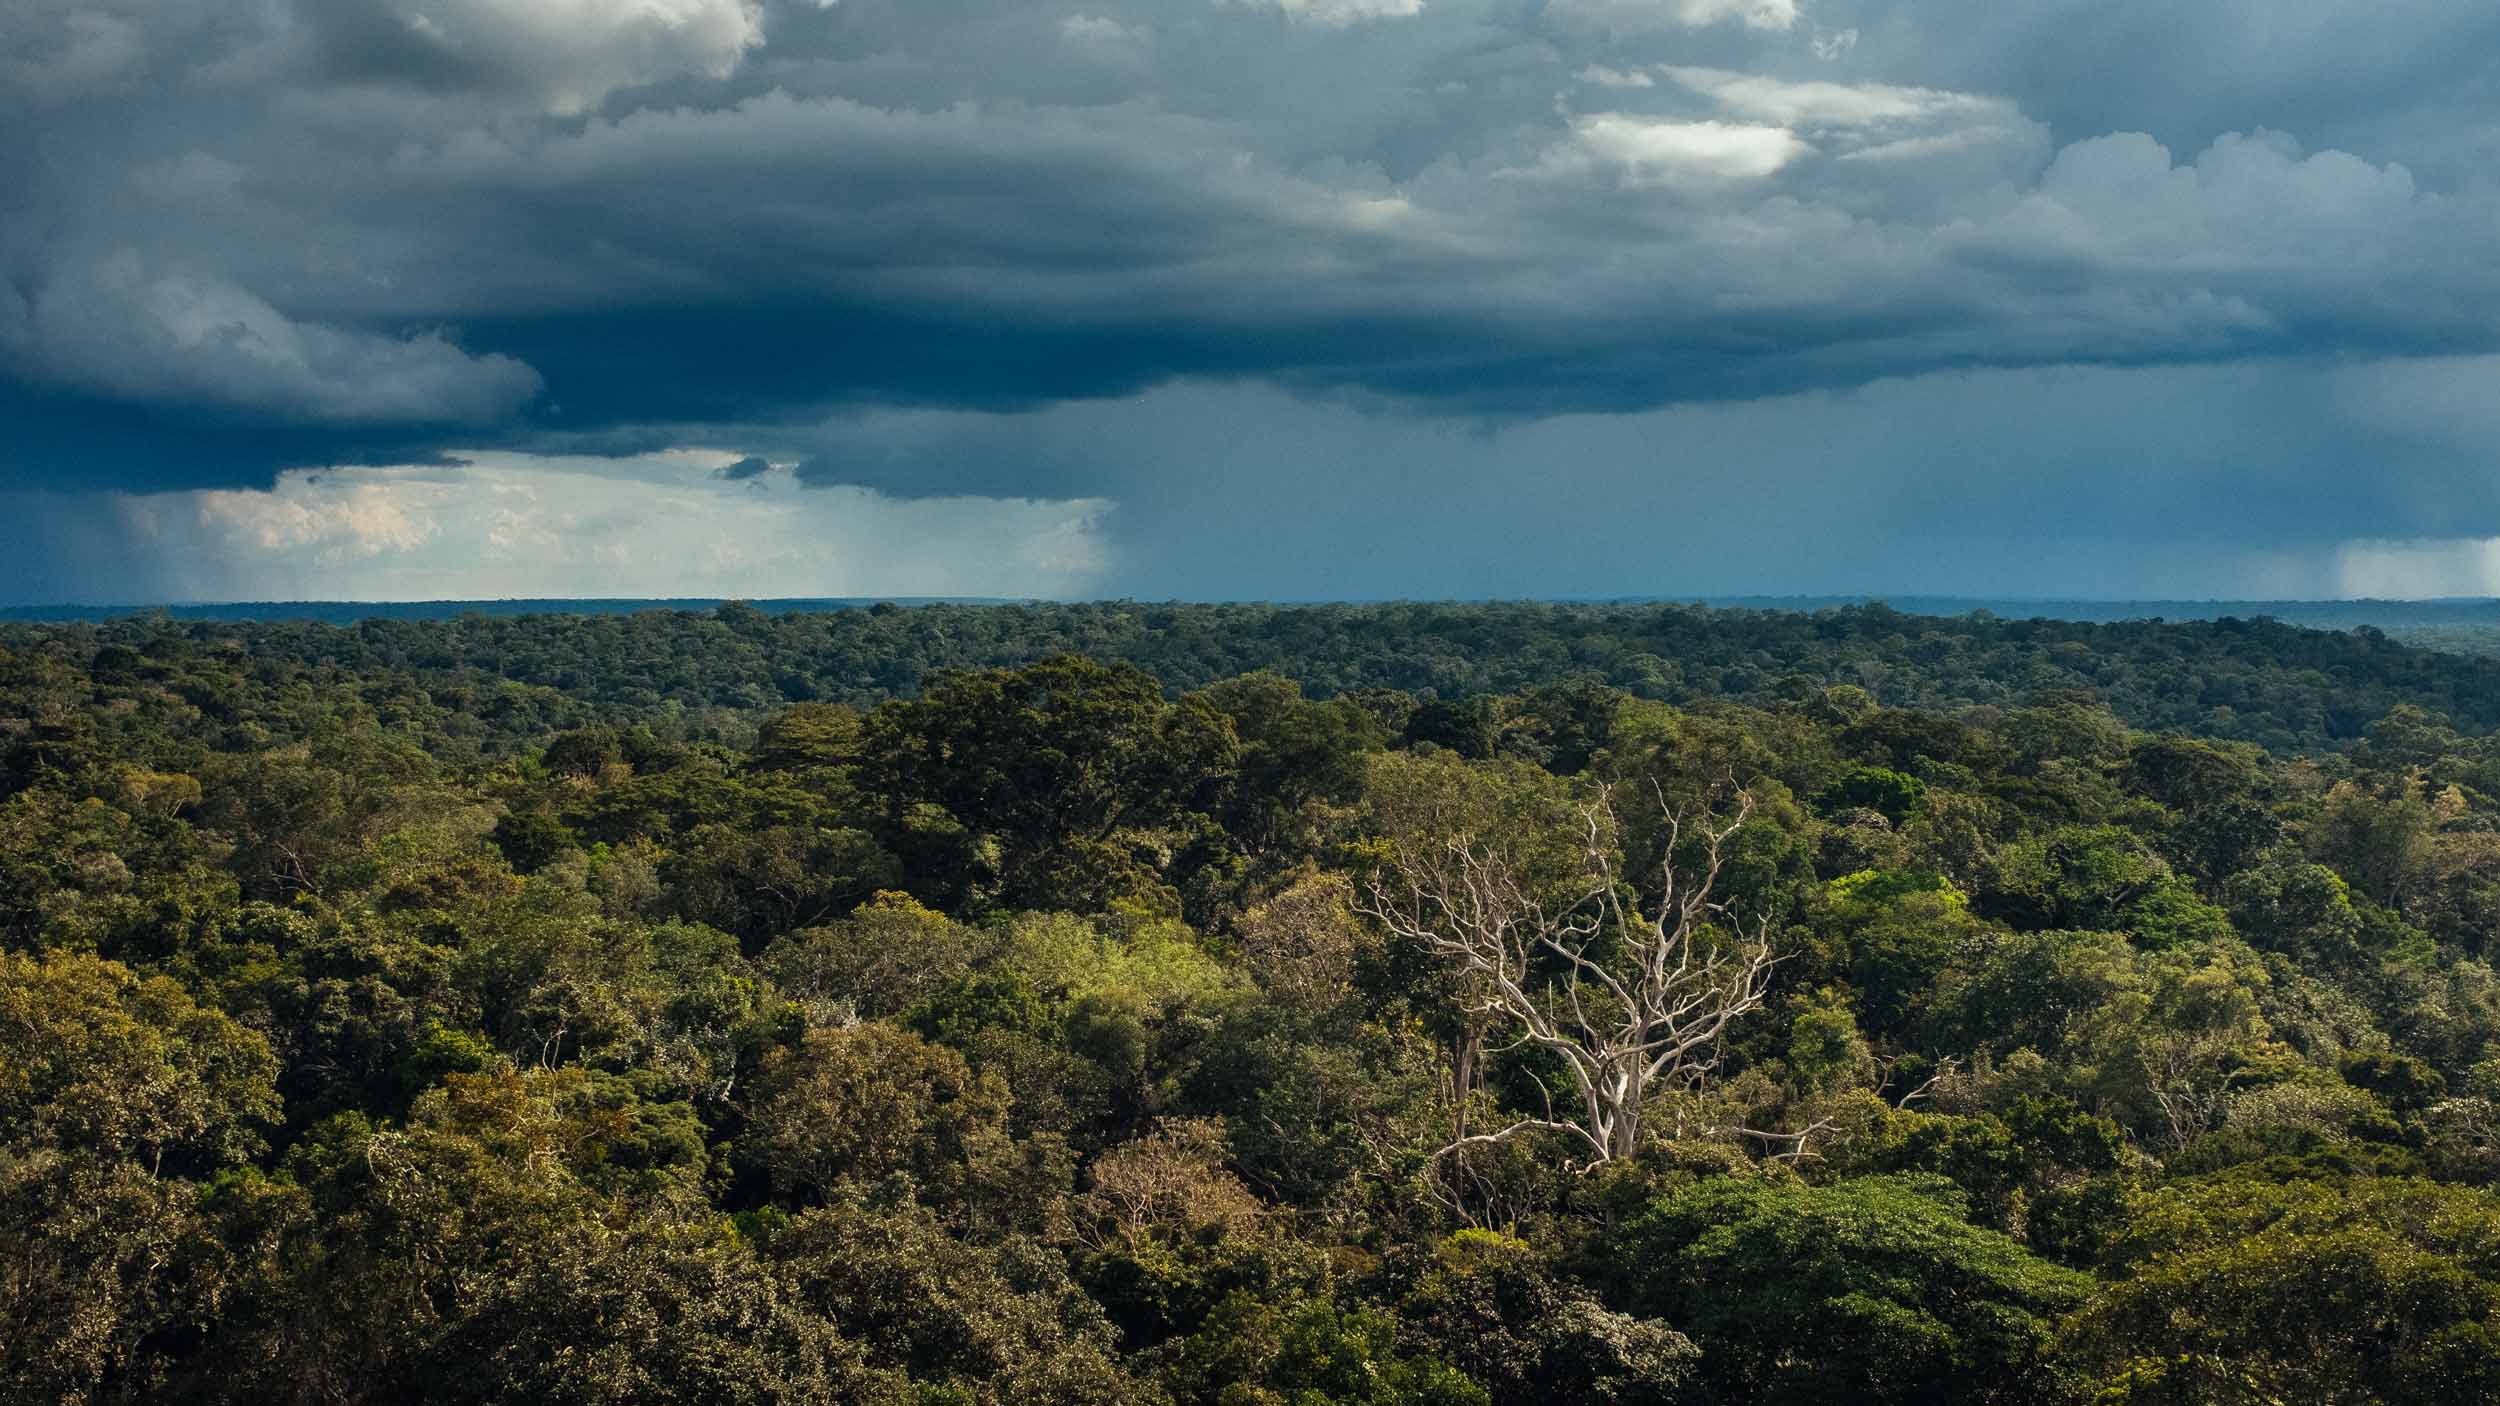 The Amazon Used To Be A Hedge Against Climate Change Those Days May Be Over